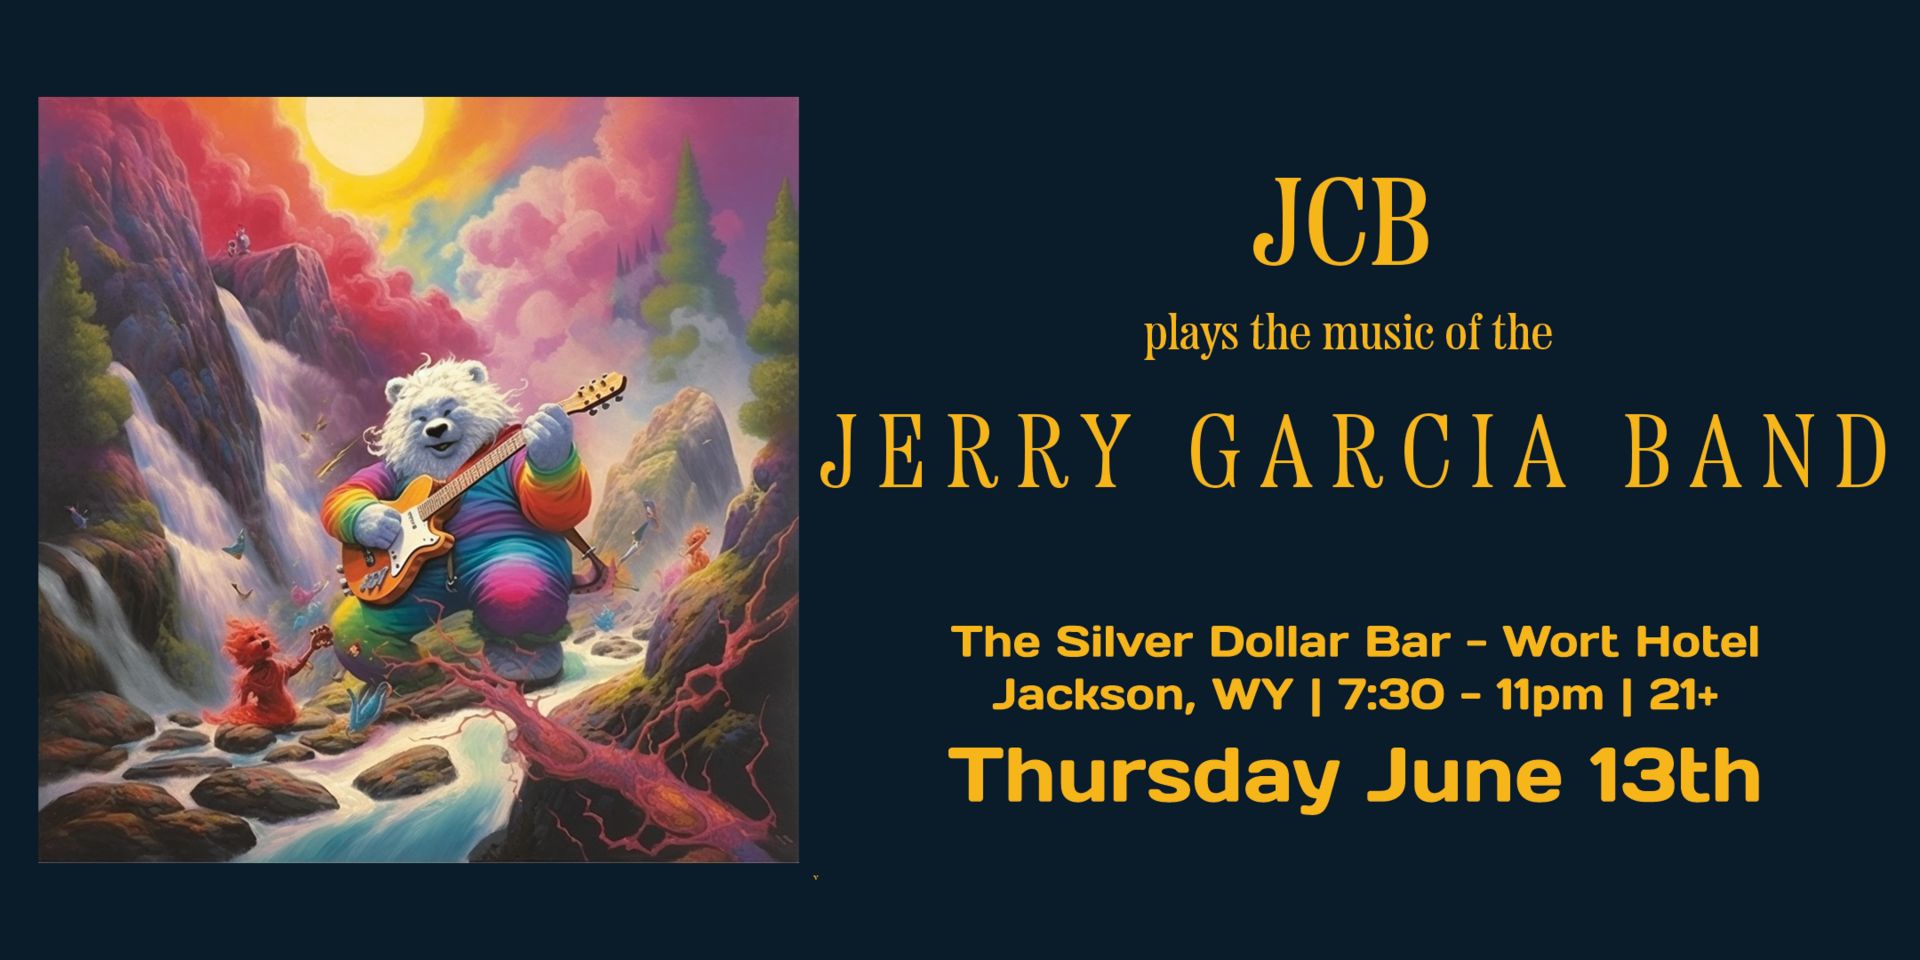 JCB plays the music of the Jerry Garcia Band at the Wort, Thursday 6/13, Jackson, Wyoming, United States